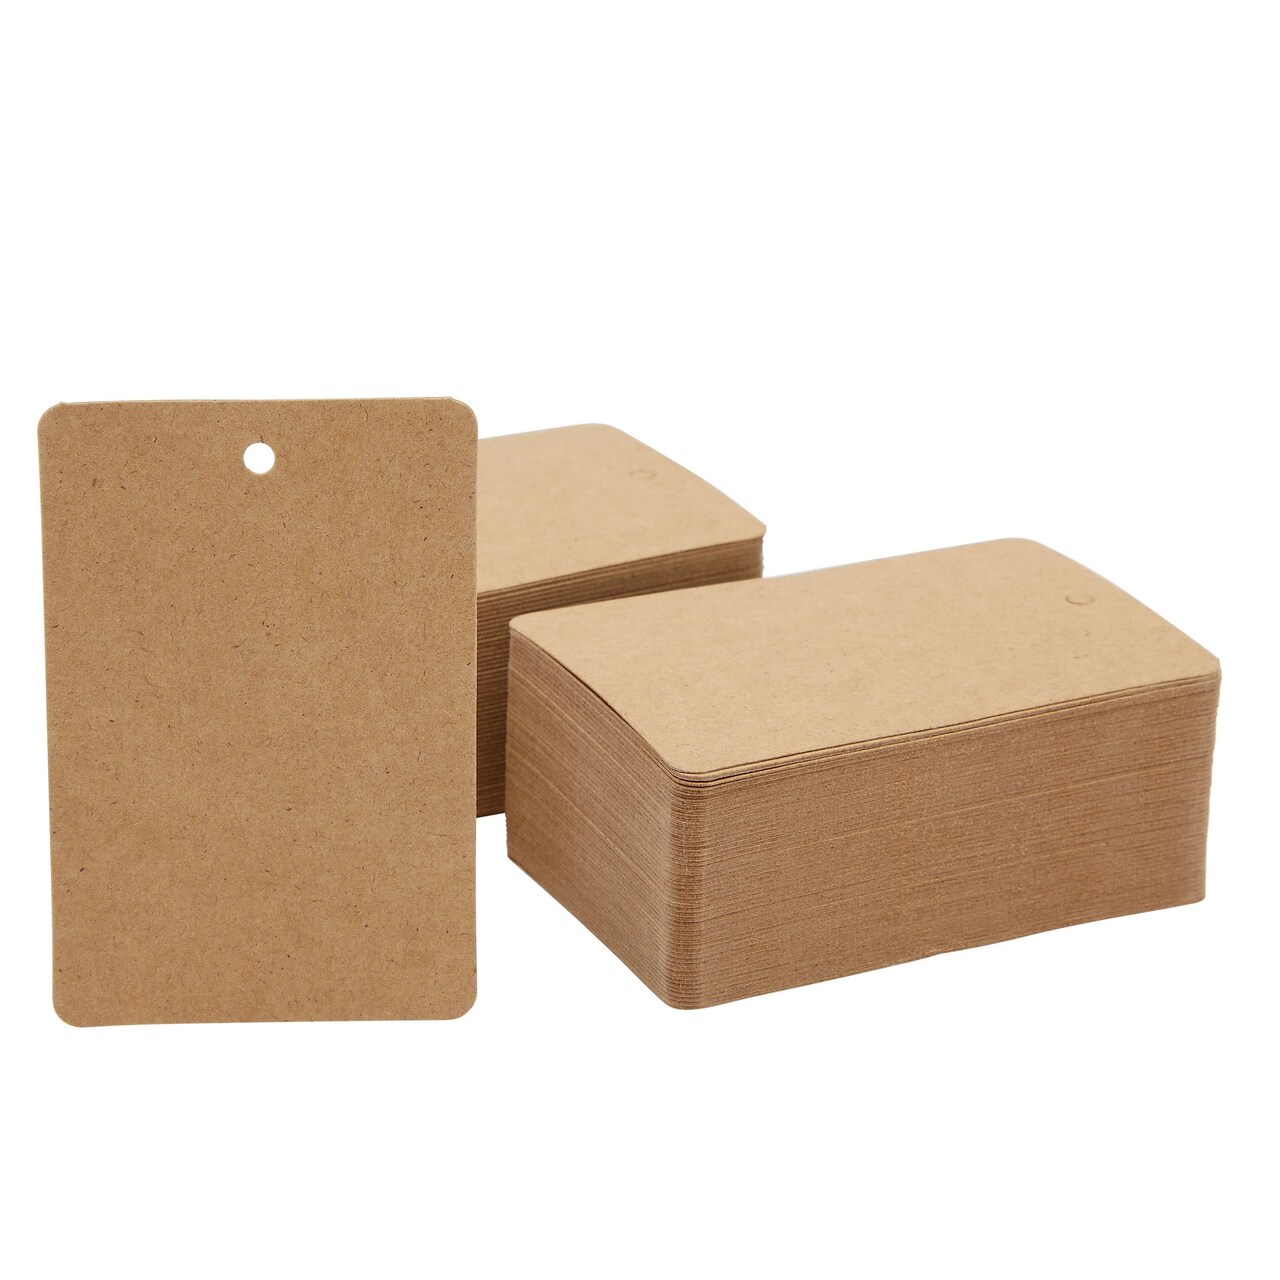 200 Pack Large Kraft Paper Gift Tags, Merchandise Tags, for Weddings,  Birthdays, Party Favors (Brown, 2 x 4 In)